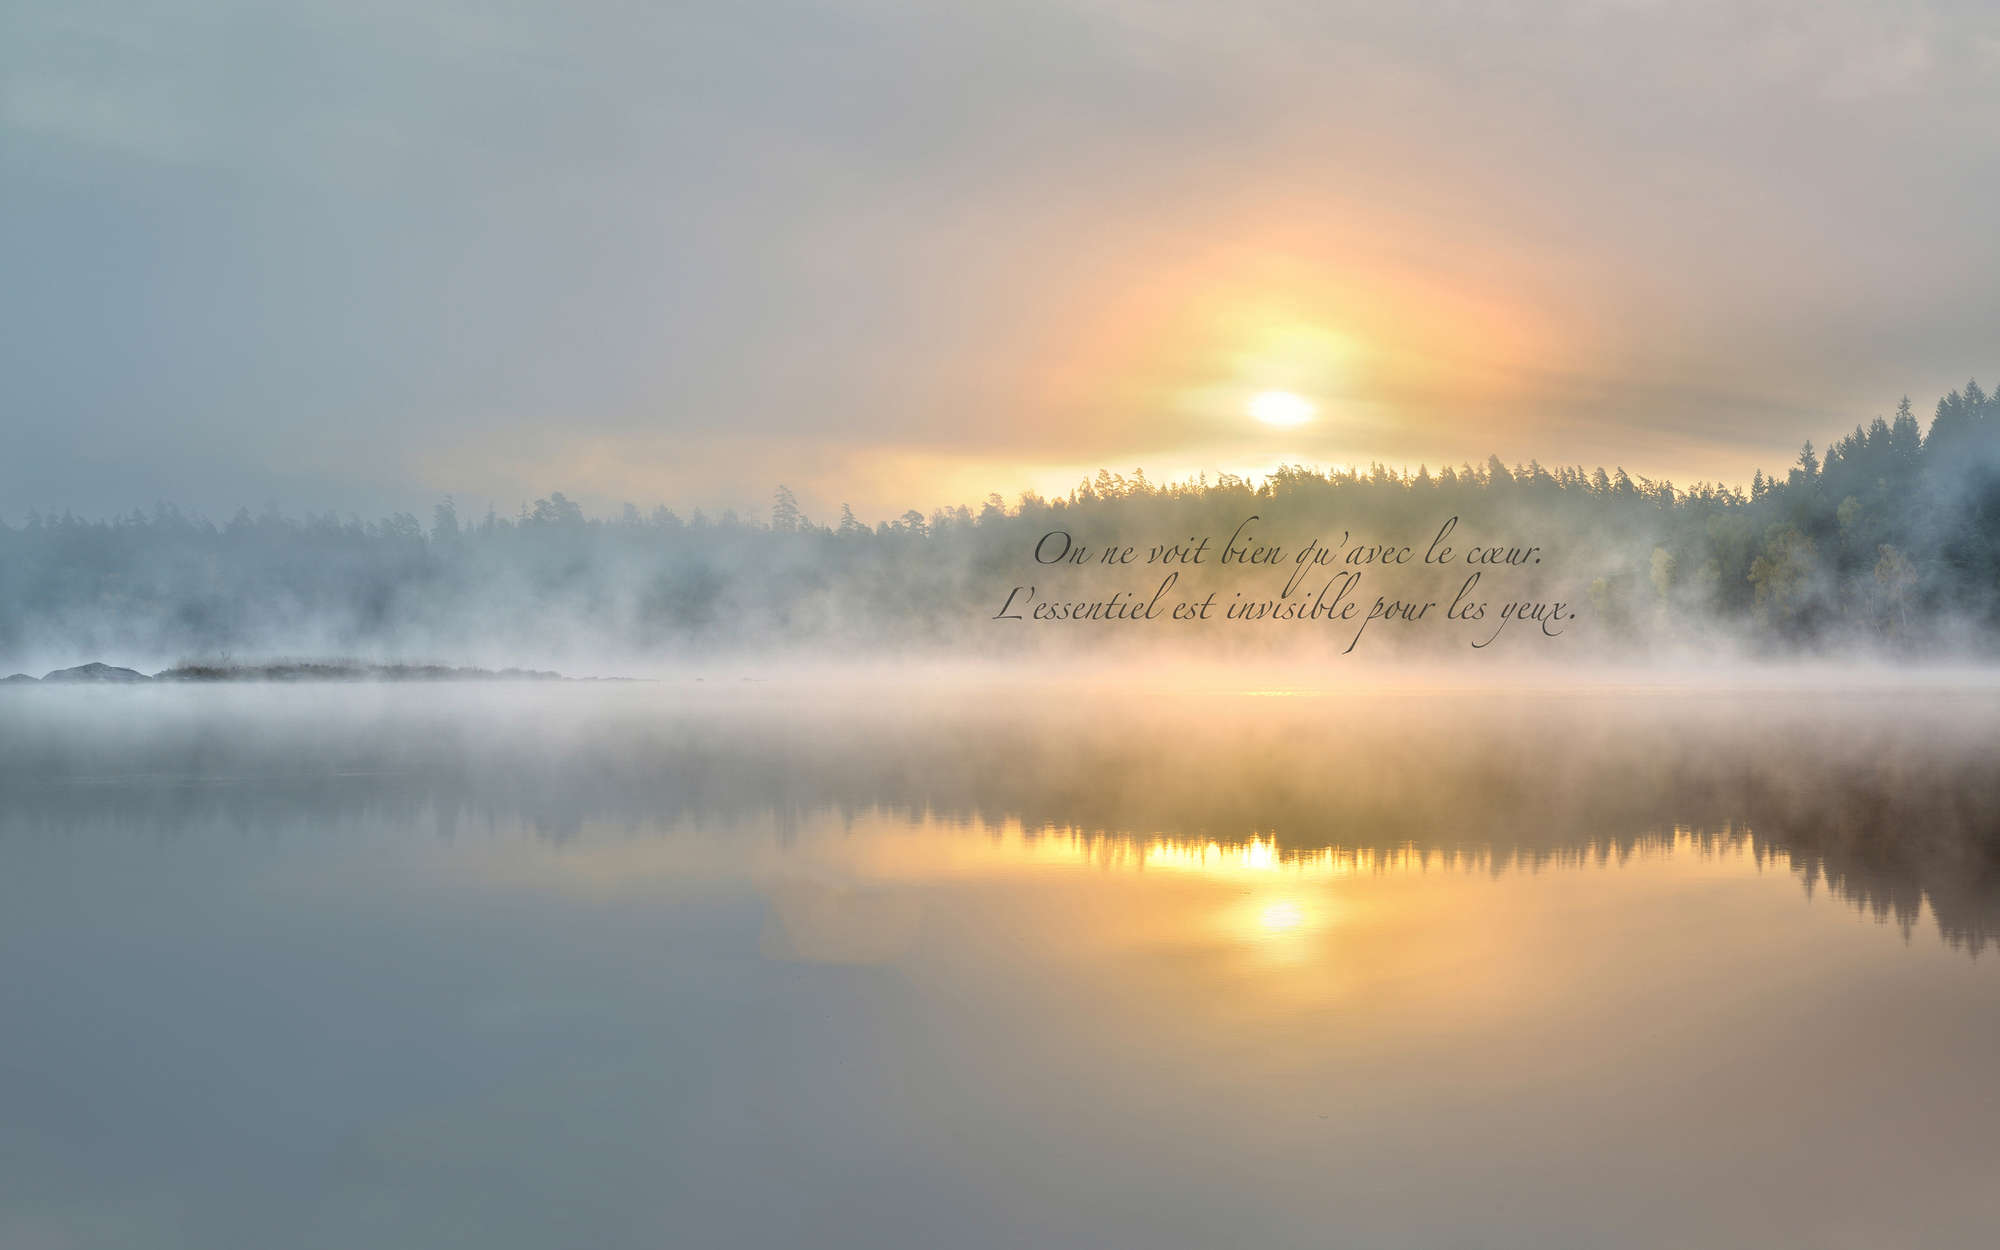             Photo wallpaper foggy lake with writing - mother-of-pearl smooth fleece
        